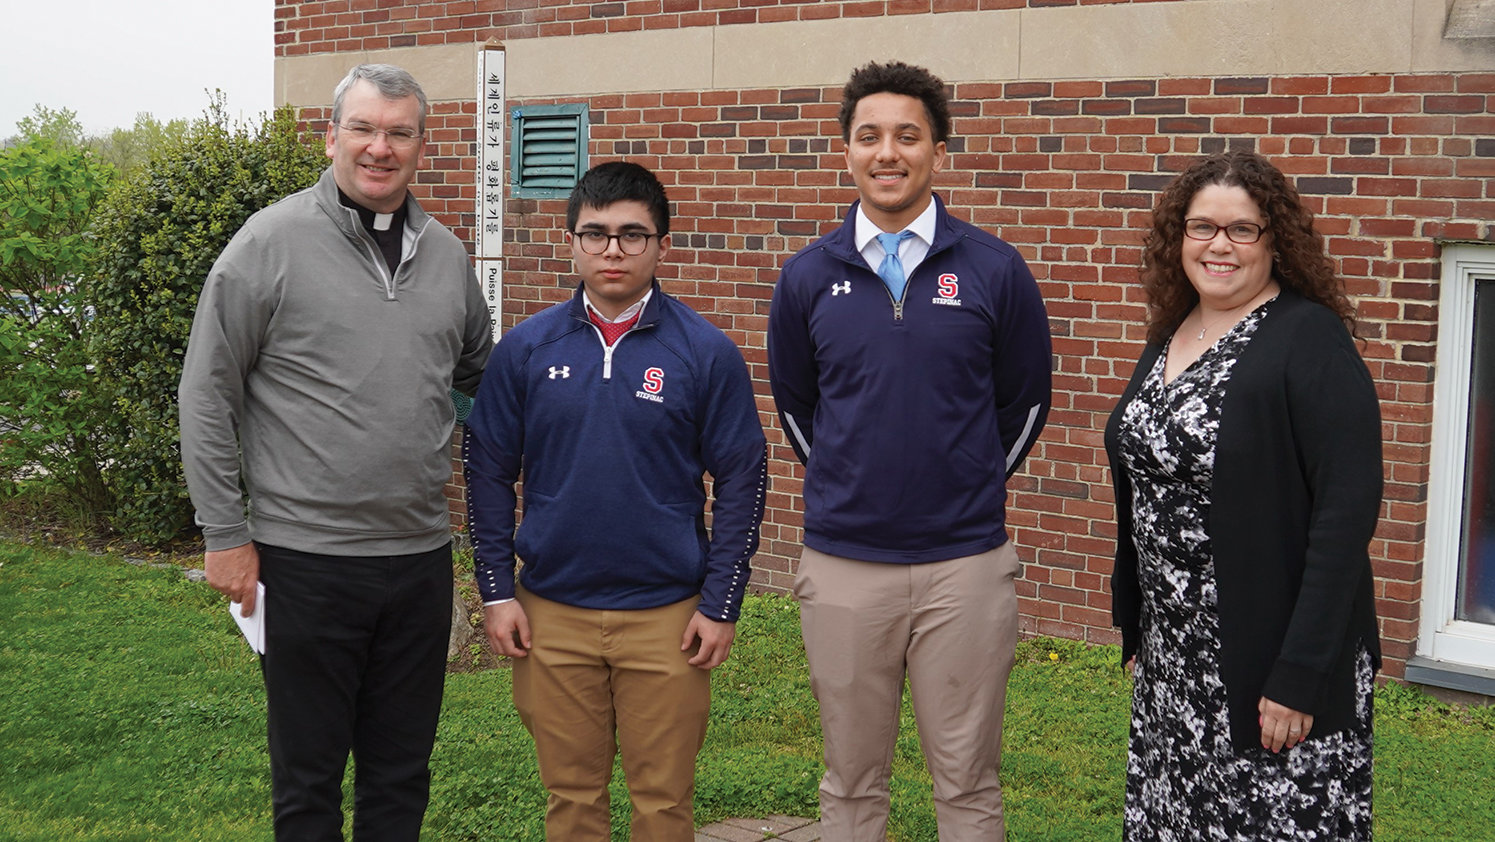 Father Thomas Collins, president of Archbishop Stepinac High School in White Plains, greets seniors Eduardo Ramirez and James McCauley, the recipients of the 2022 Xavier E. Flores Memorial Scholarship, and Evelyn Flores, his widow.